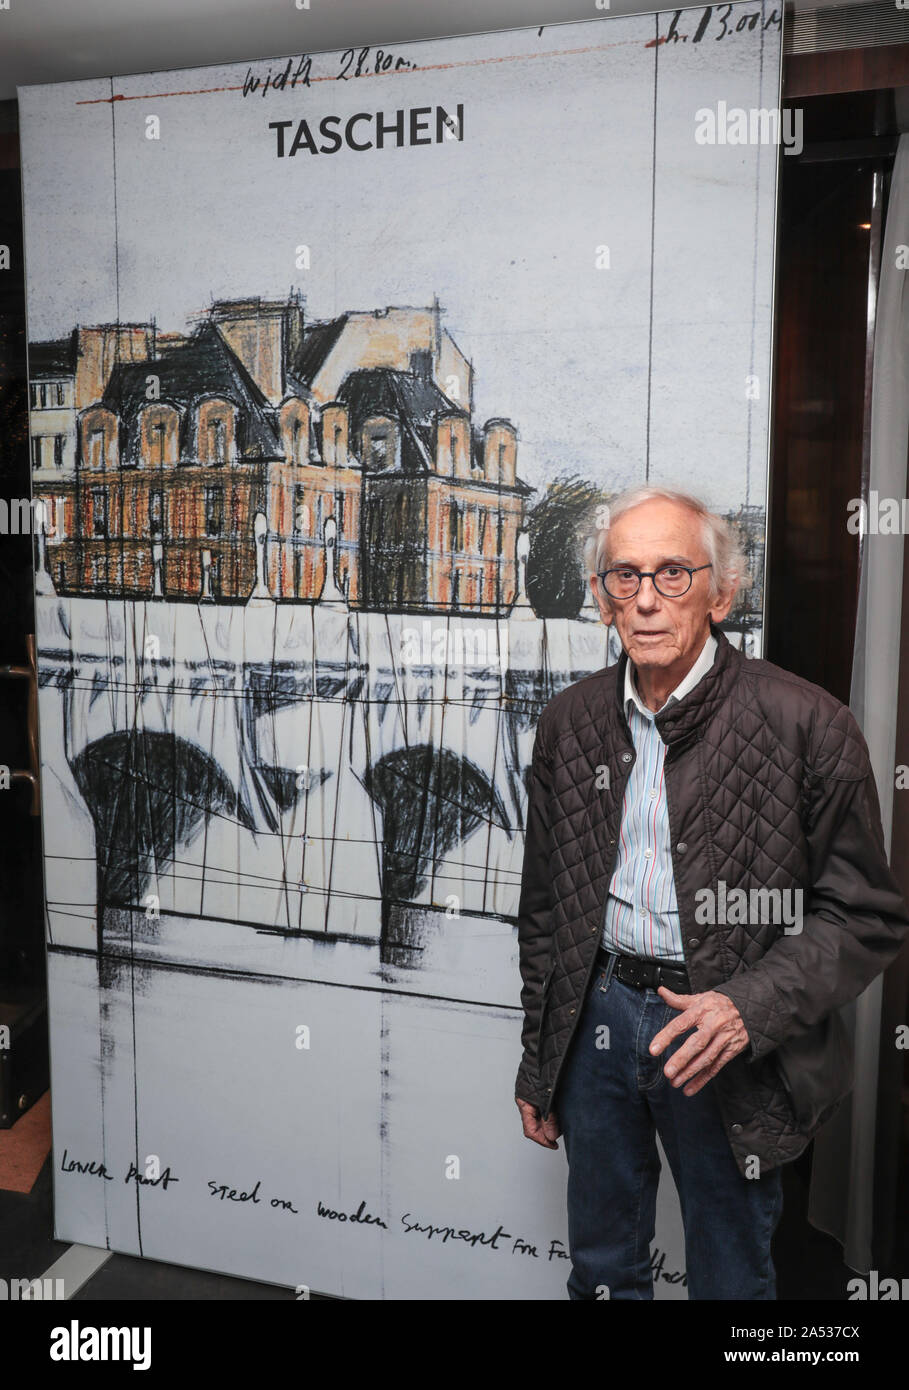 BOOK SIGNING WITH CHRISTO , TASCHEN PARIS Stock Photo